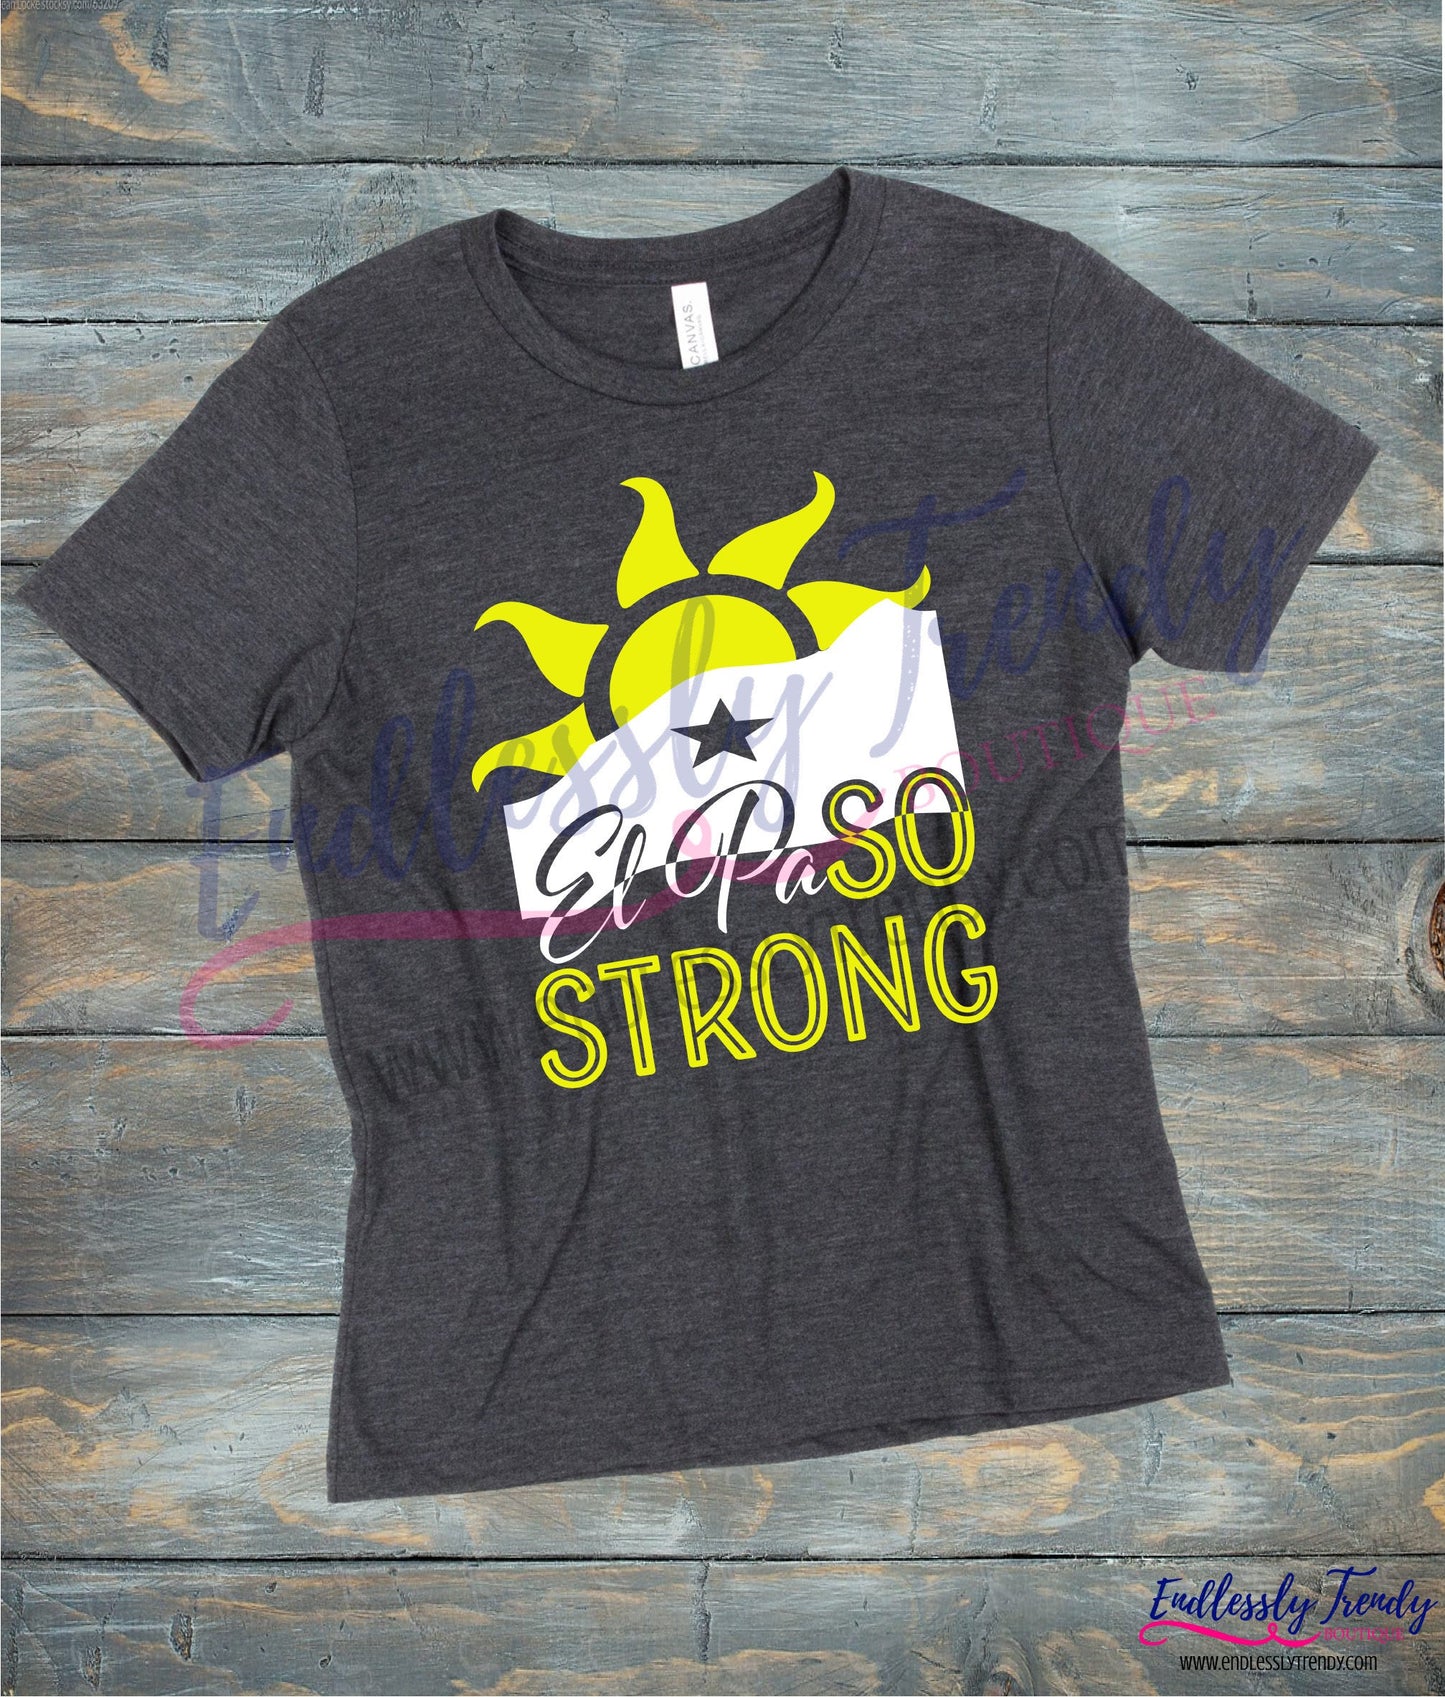 CHILD SIZING - El Paso Strong Tee - #ElPaSOSTRONG - Endlessly Trendy Boutique